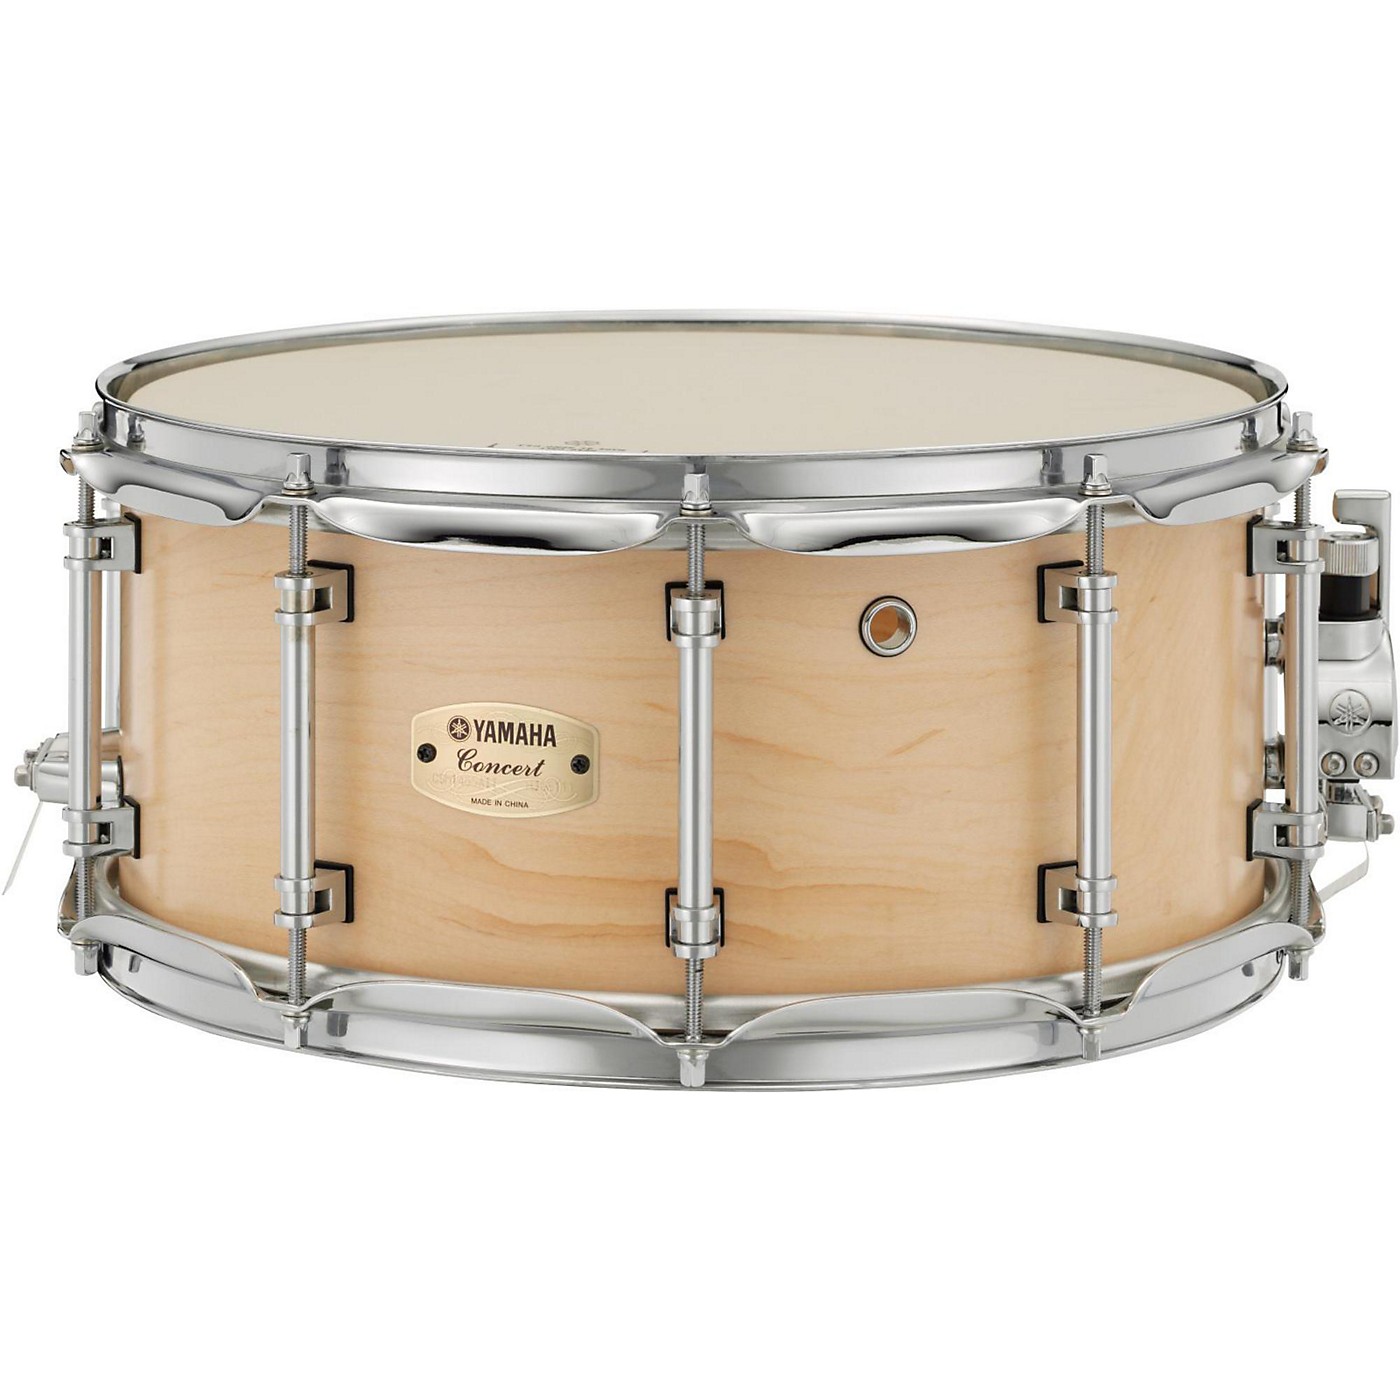 Yamaha Concert Series Maple Snare Drum thumbnail